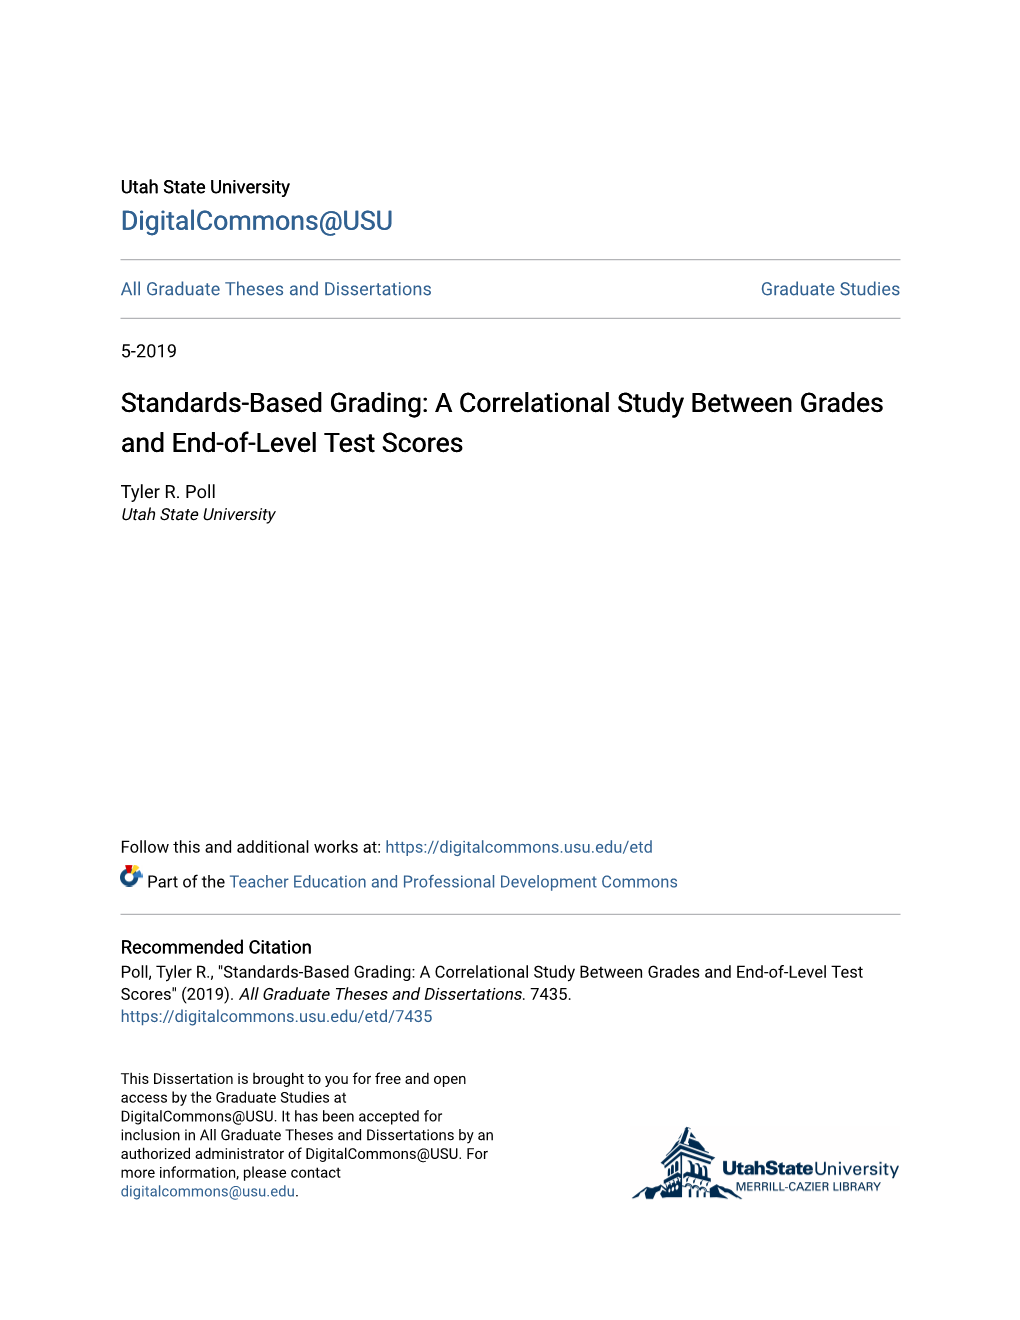 Standards-Based Grading: a Correlational Study Between Grades and End-Of-Level Test Scores